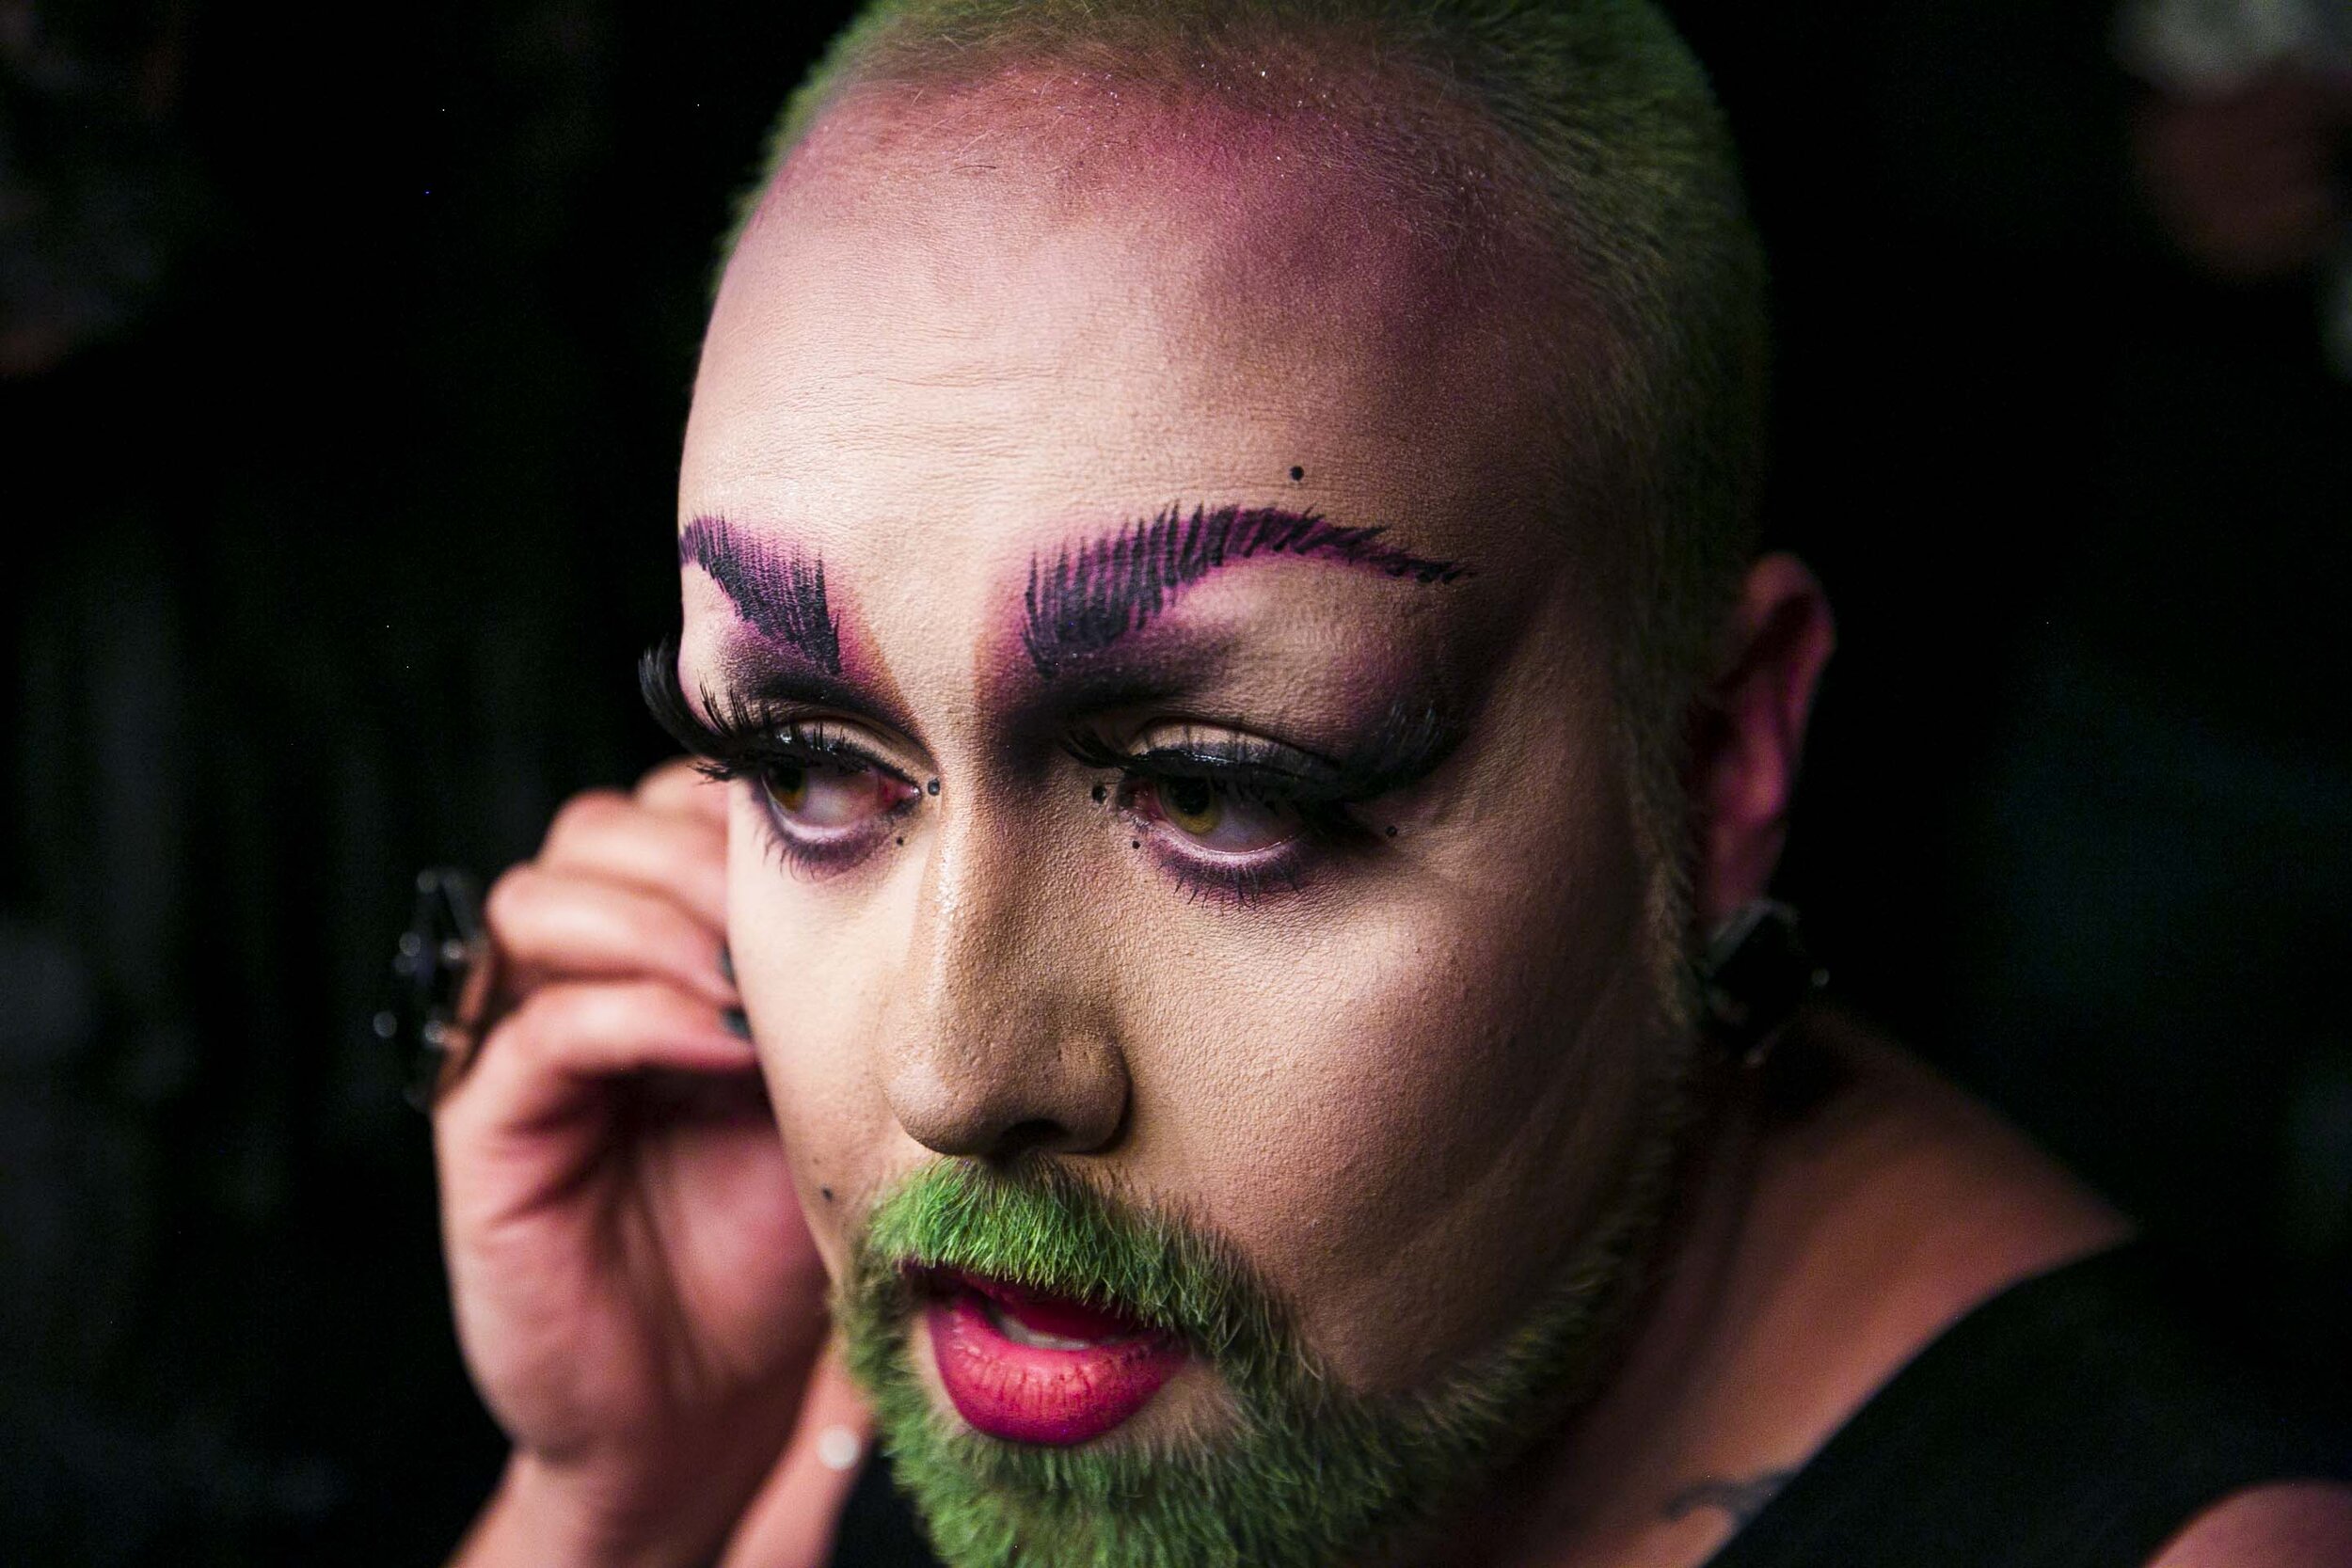  Robby, drag name EmmaSis, a drag queen and mentor of a gender creative child, then 25,  prepares to take the stage during the International Drag Festival 2018 in Austin, Texas, U.S., Nov. 16, 2018.  